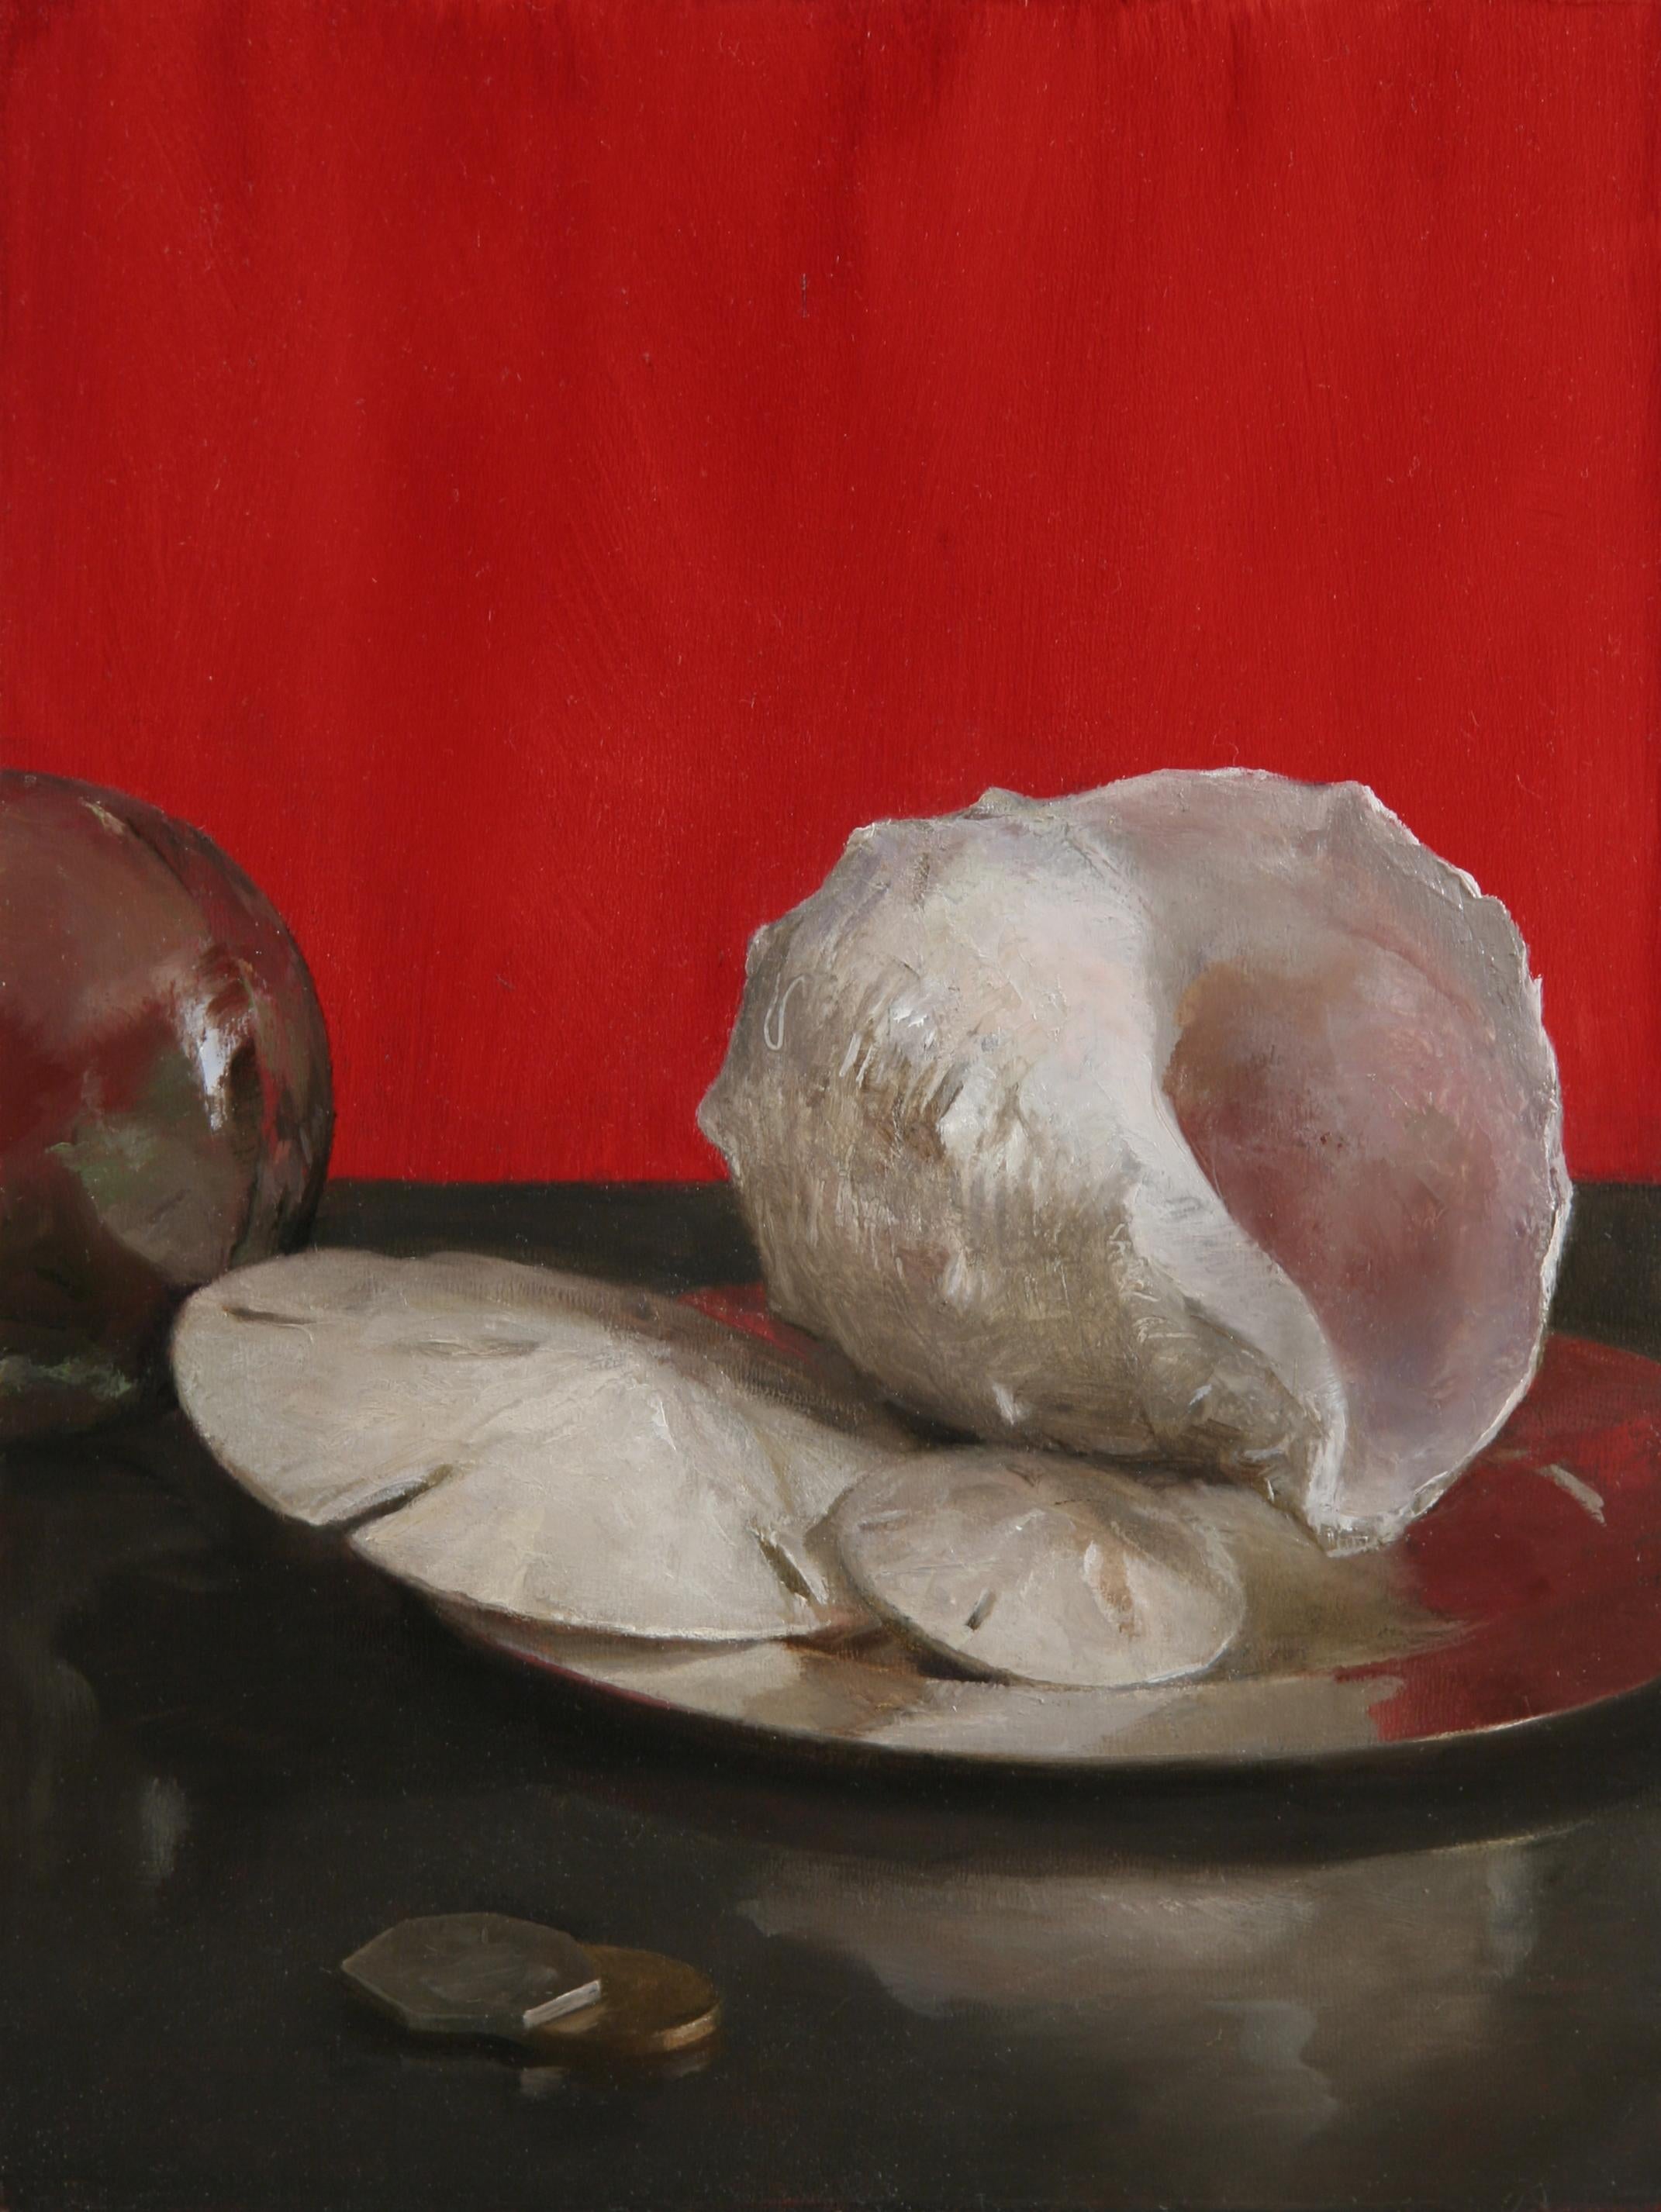 Helen Oh Animal Painting - Sea Shell Still Life (Red), Original Oil Painting with Shells, Coins and Orb